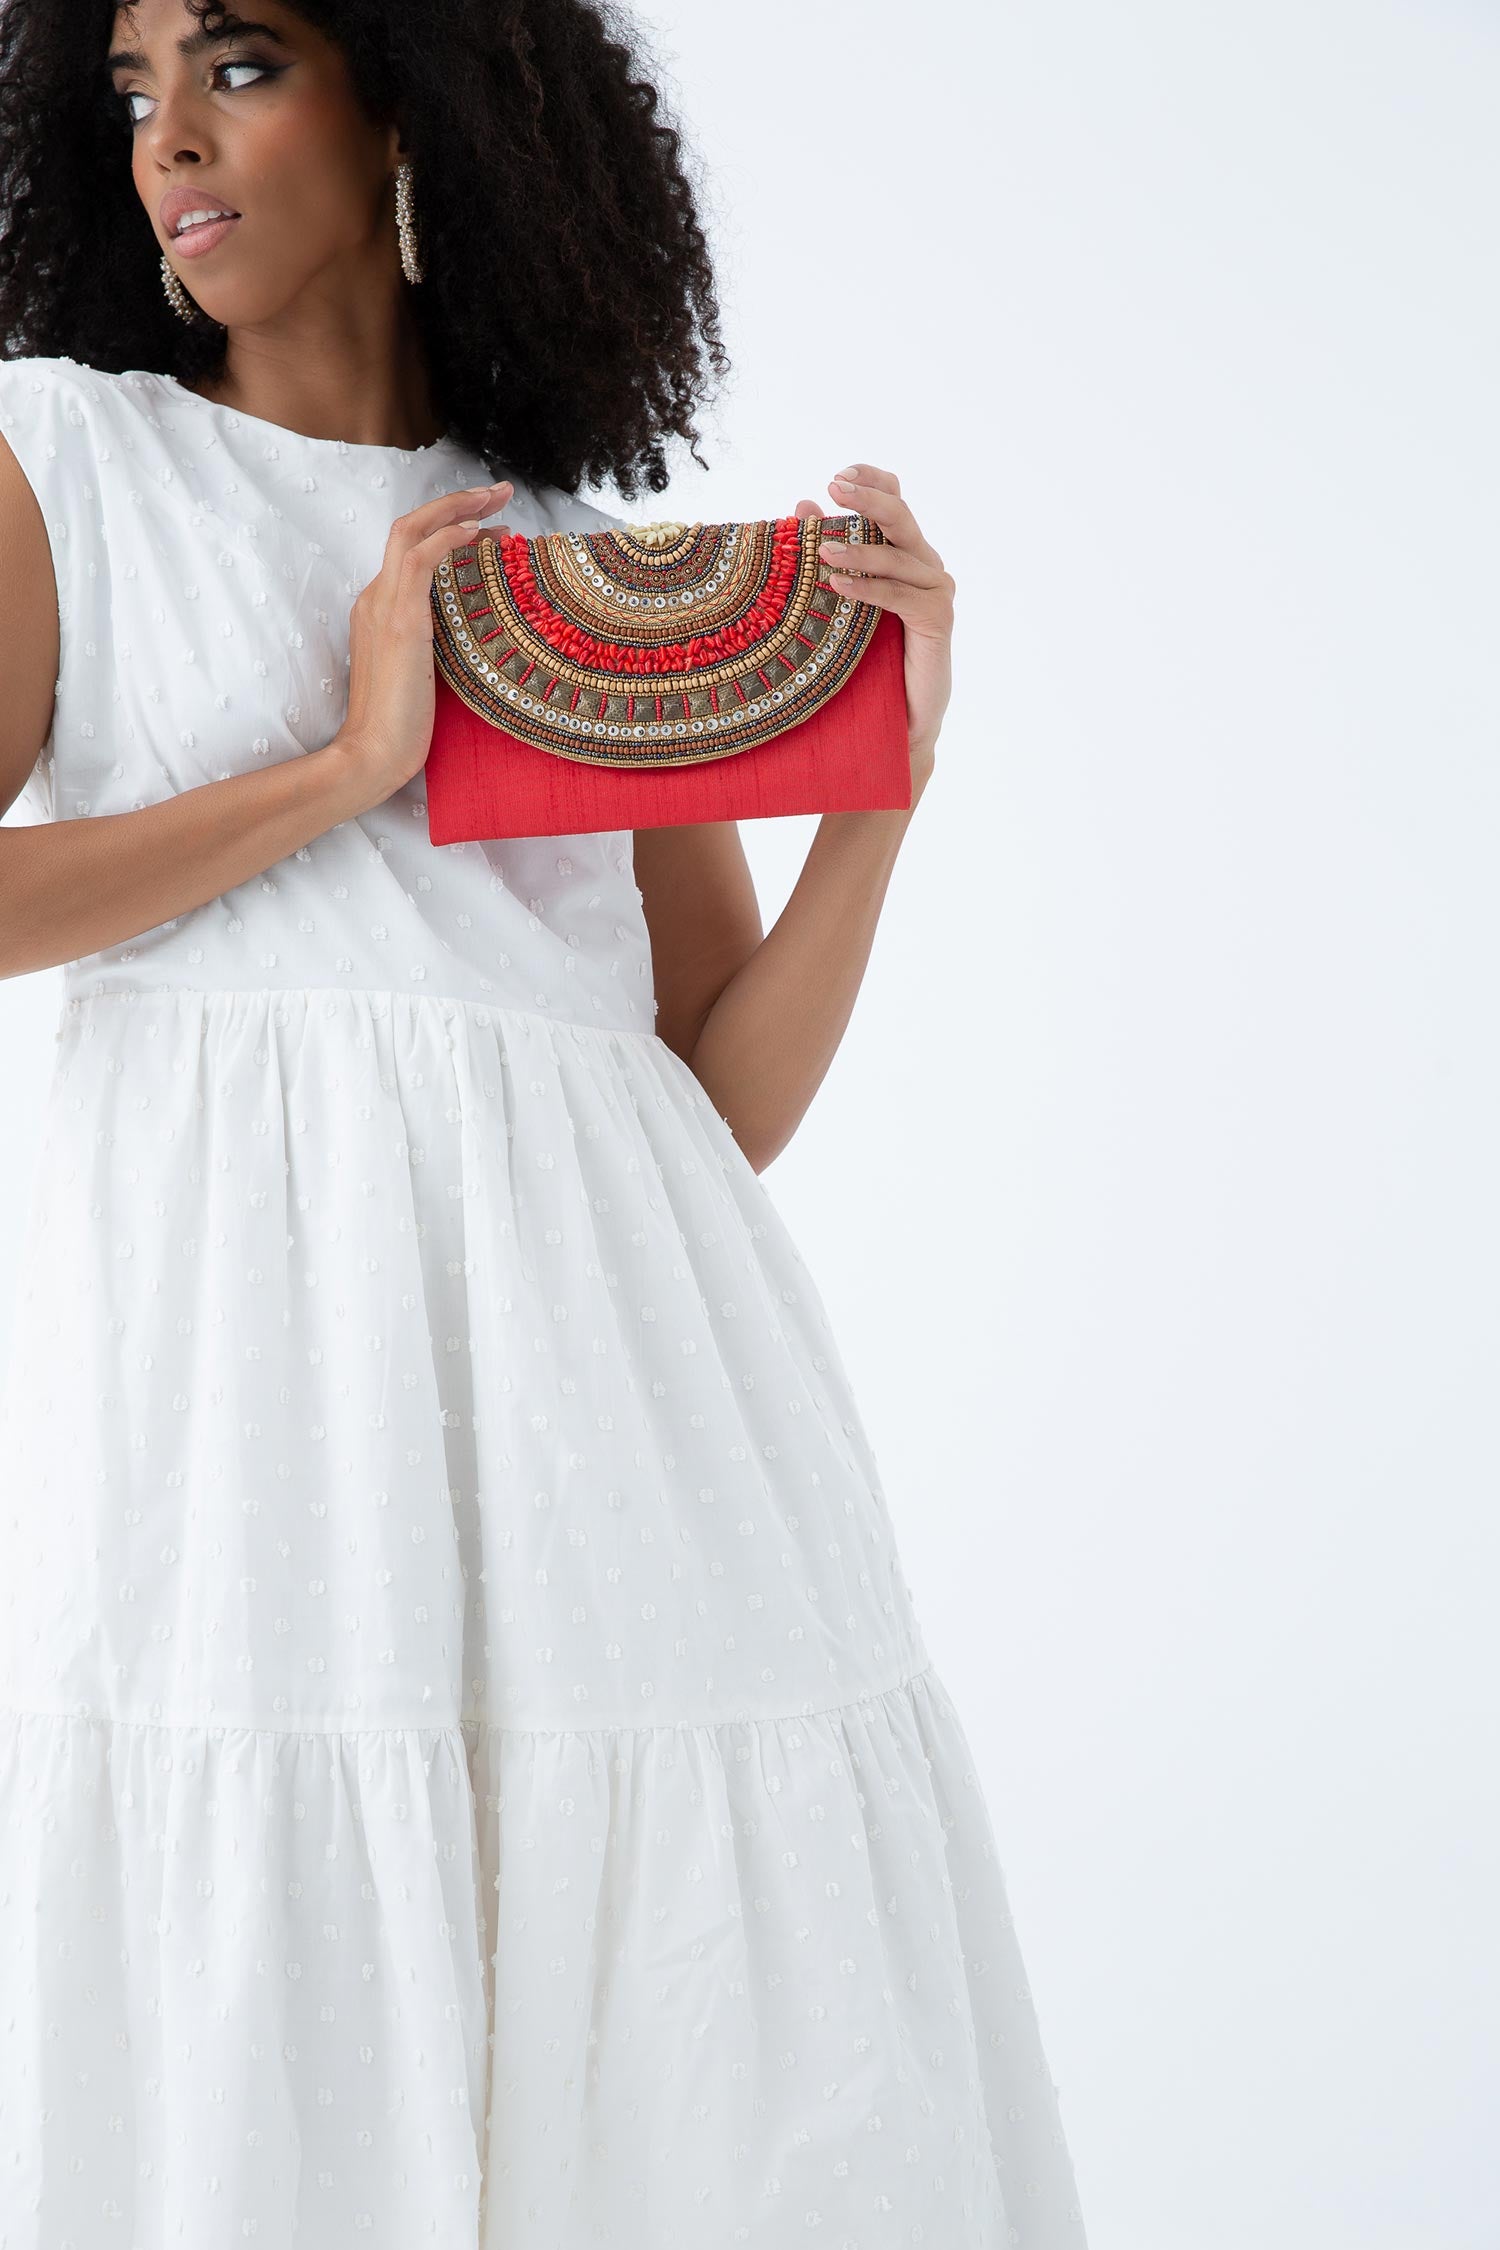 Red Chic Clutch